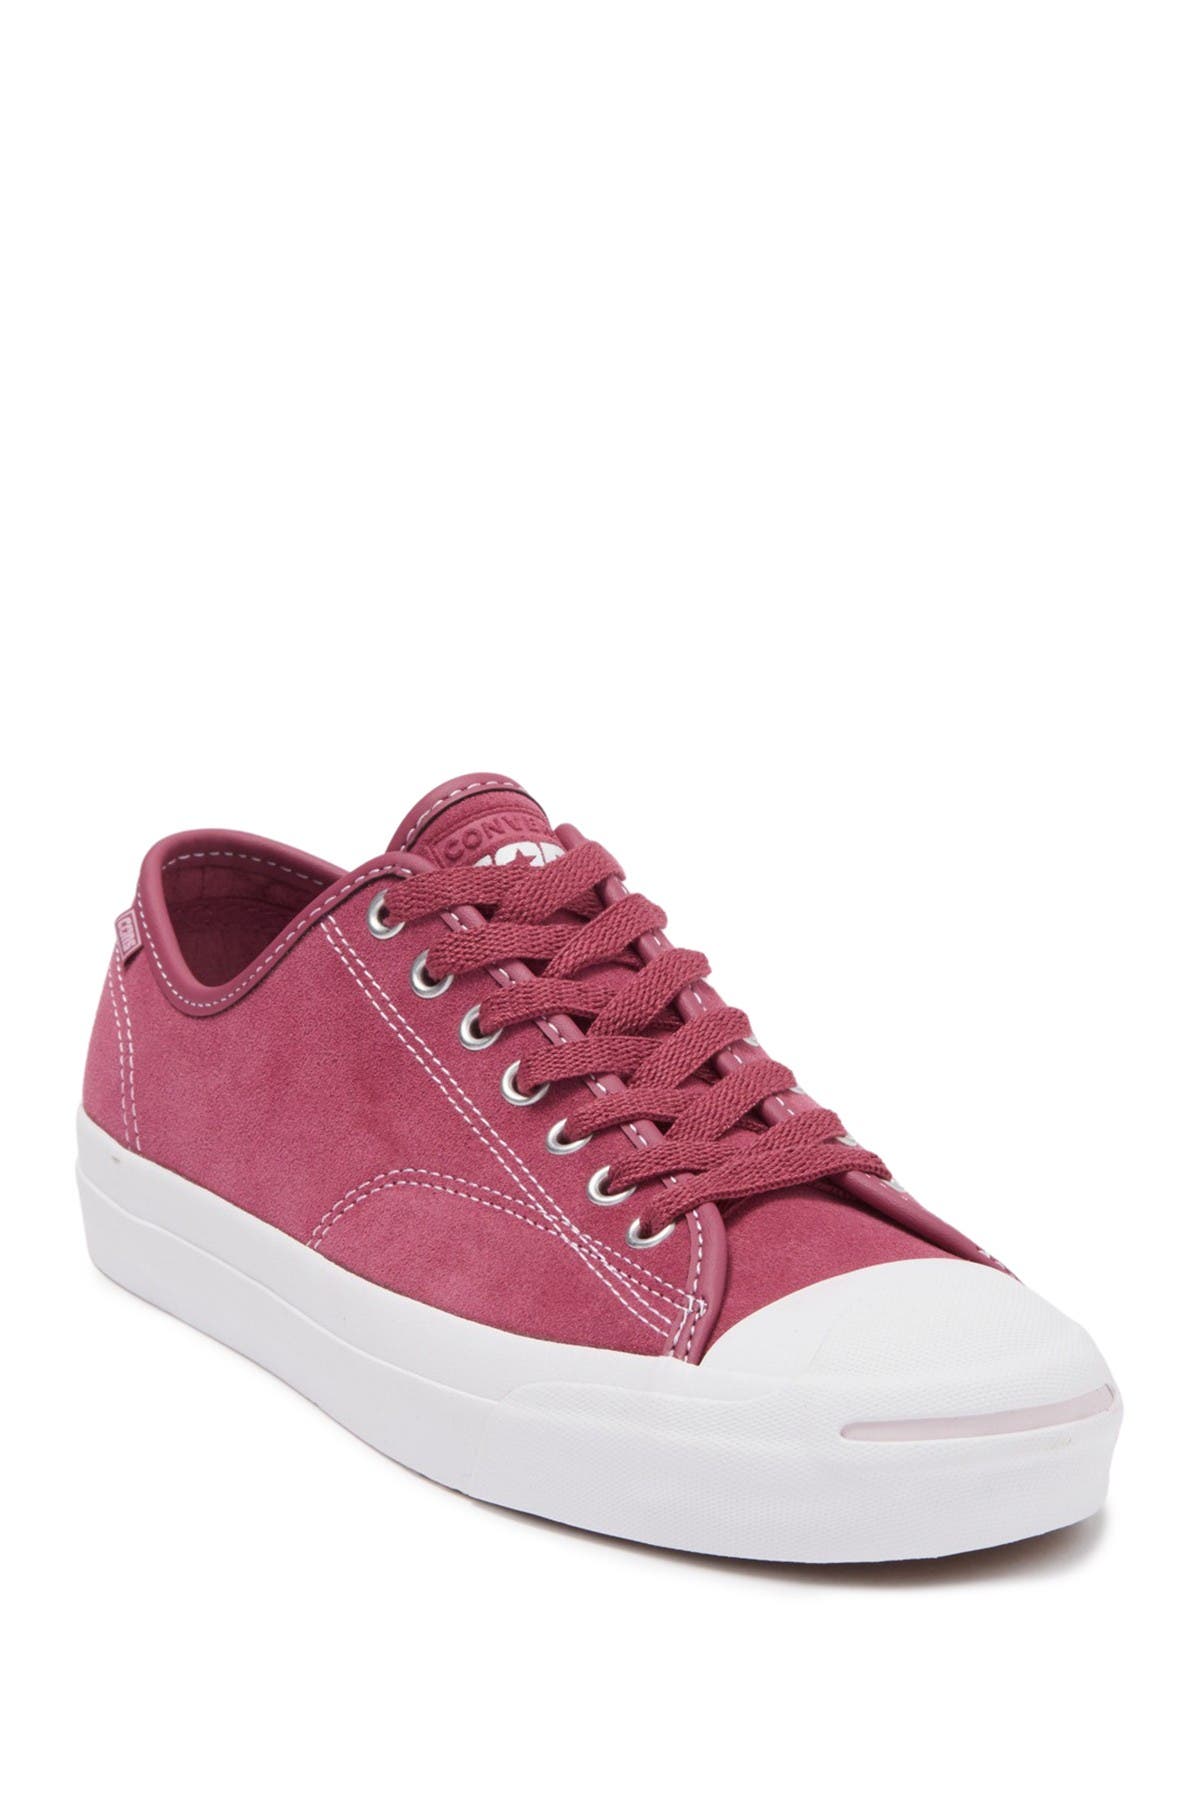 converse jack purcell pink